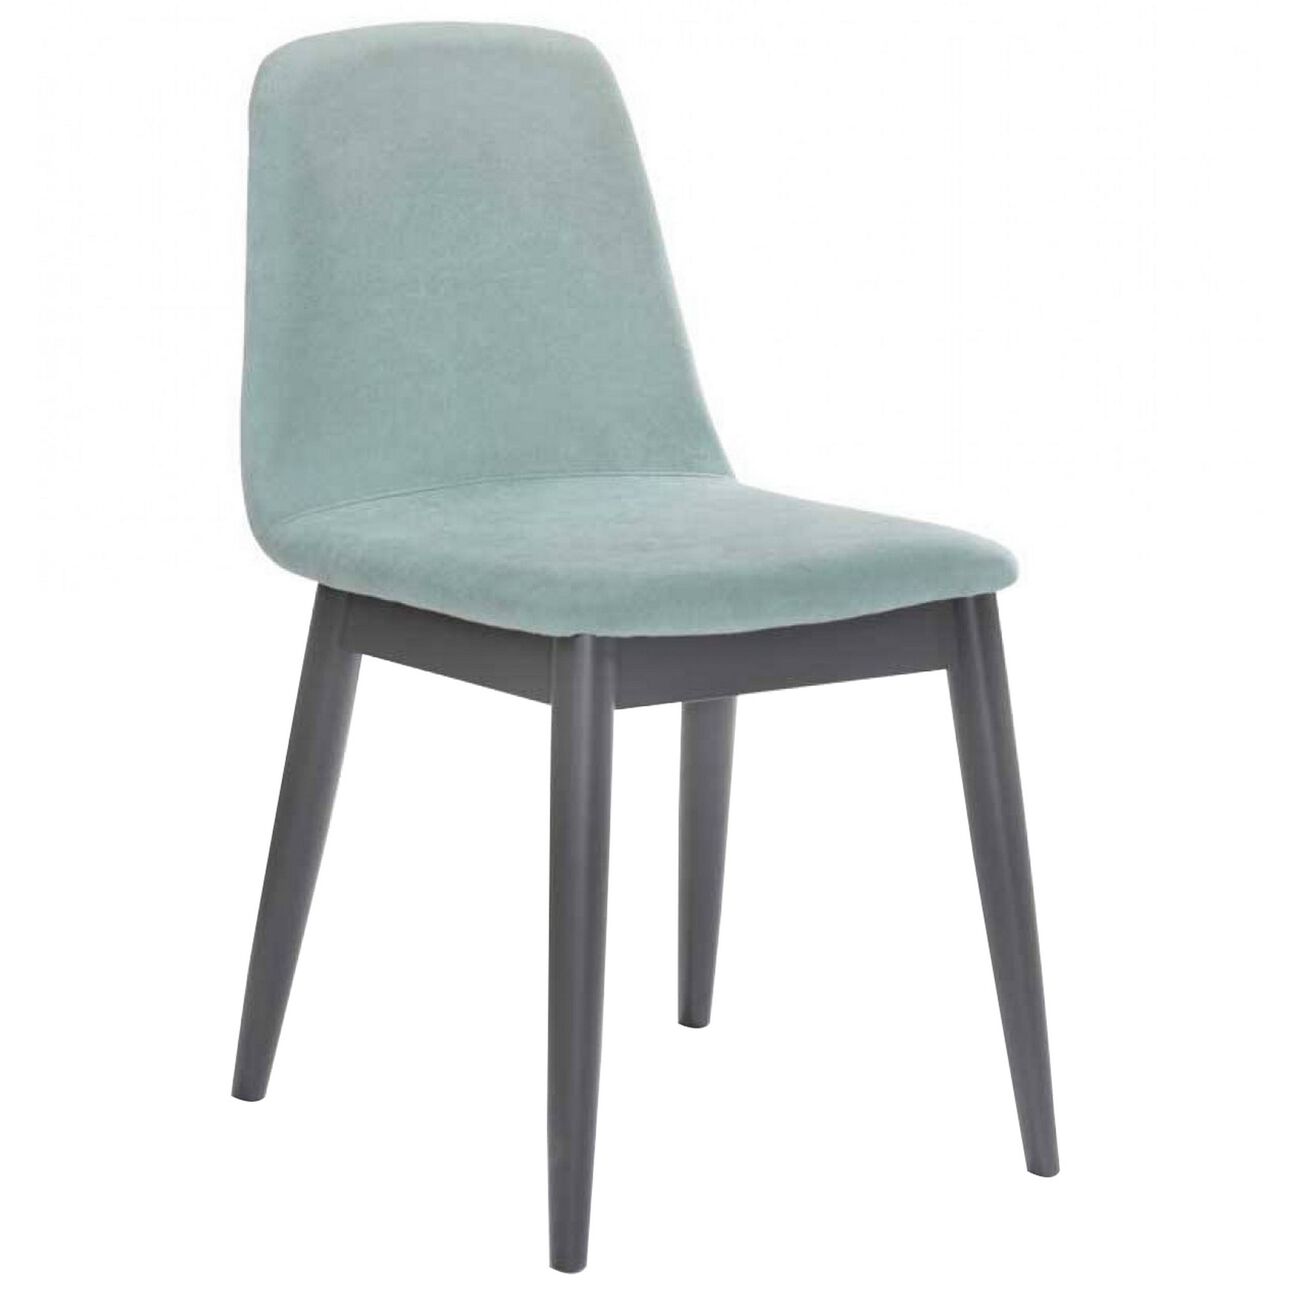 Fabric Upholstered Dining Chair with Round Legs, Set of 2, Blue and Gray